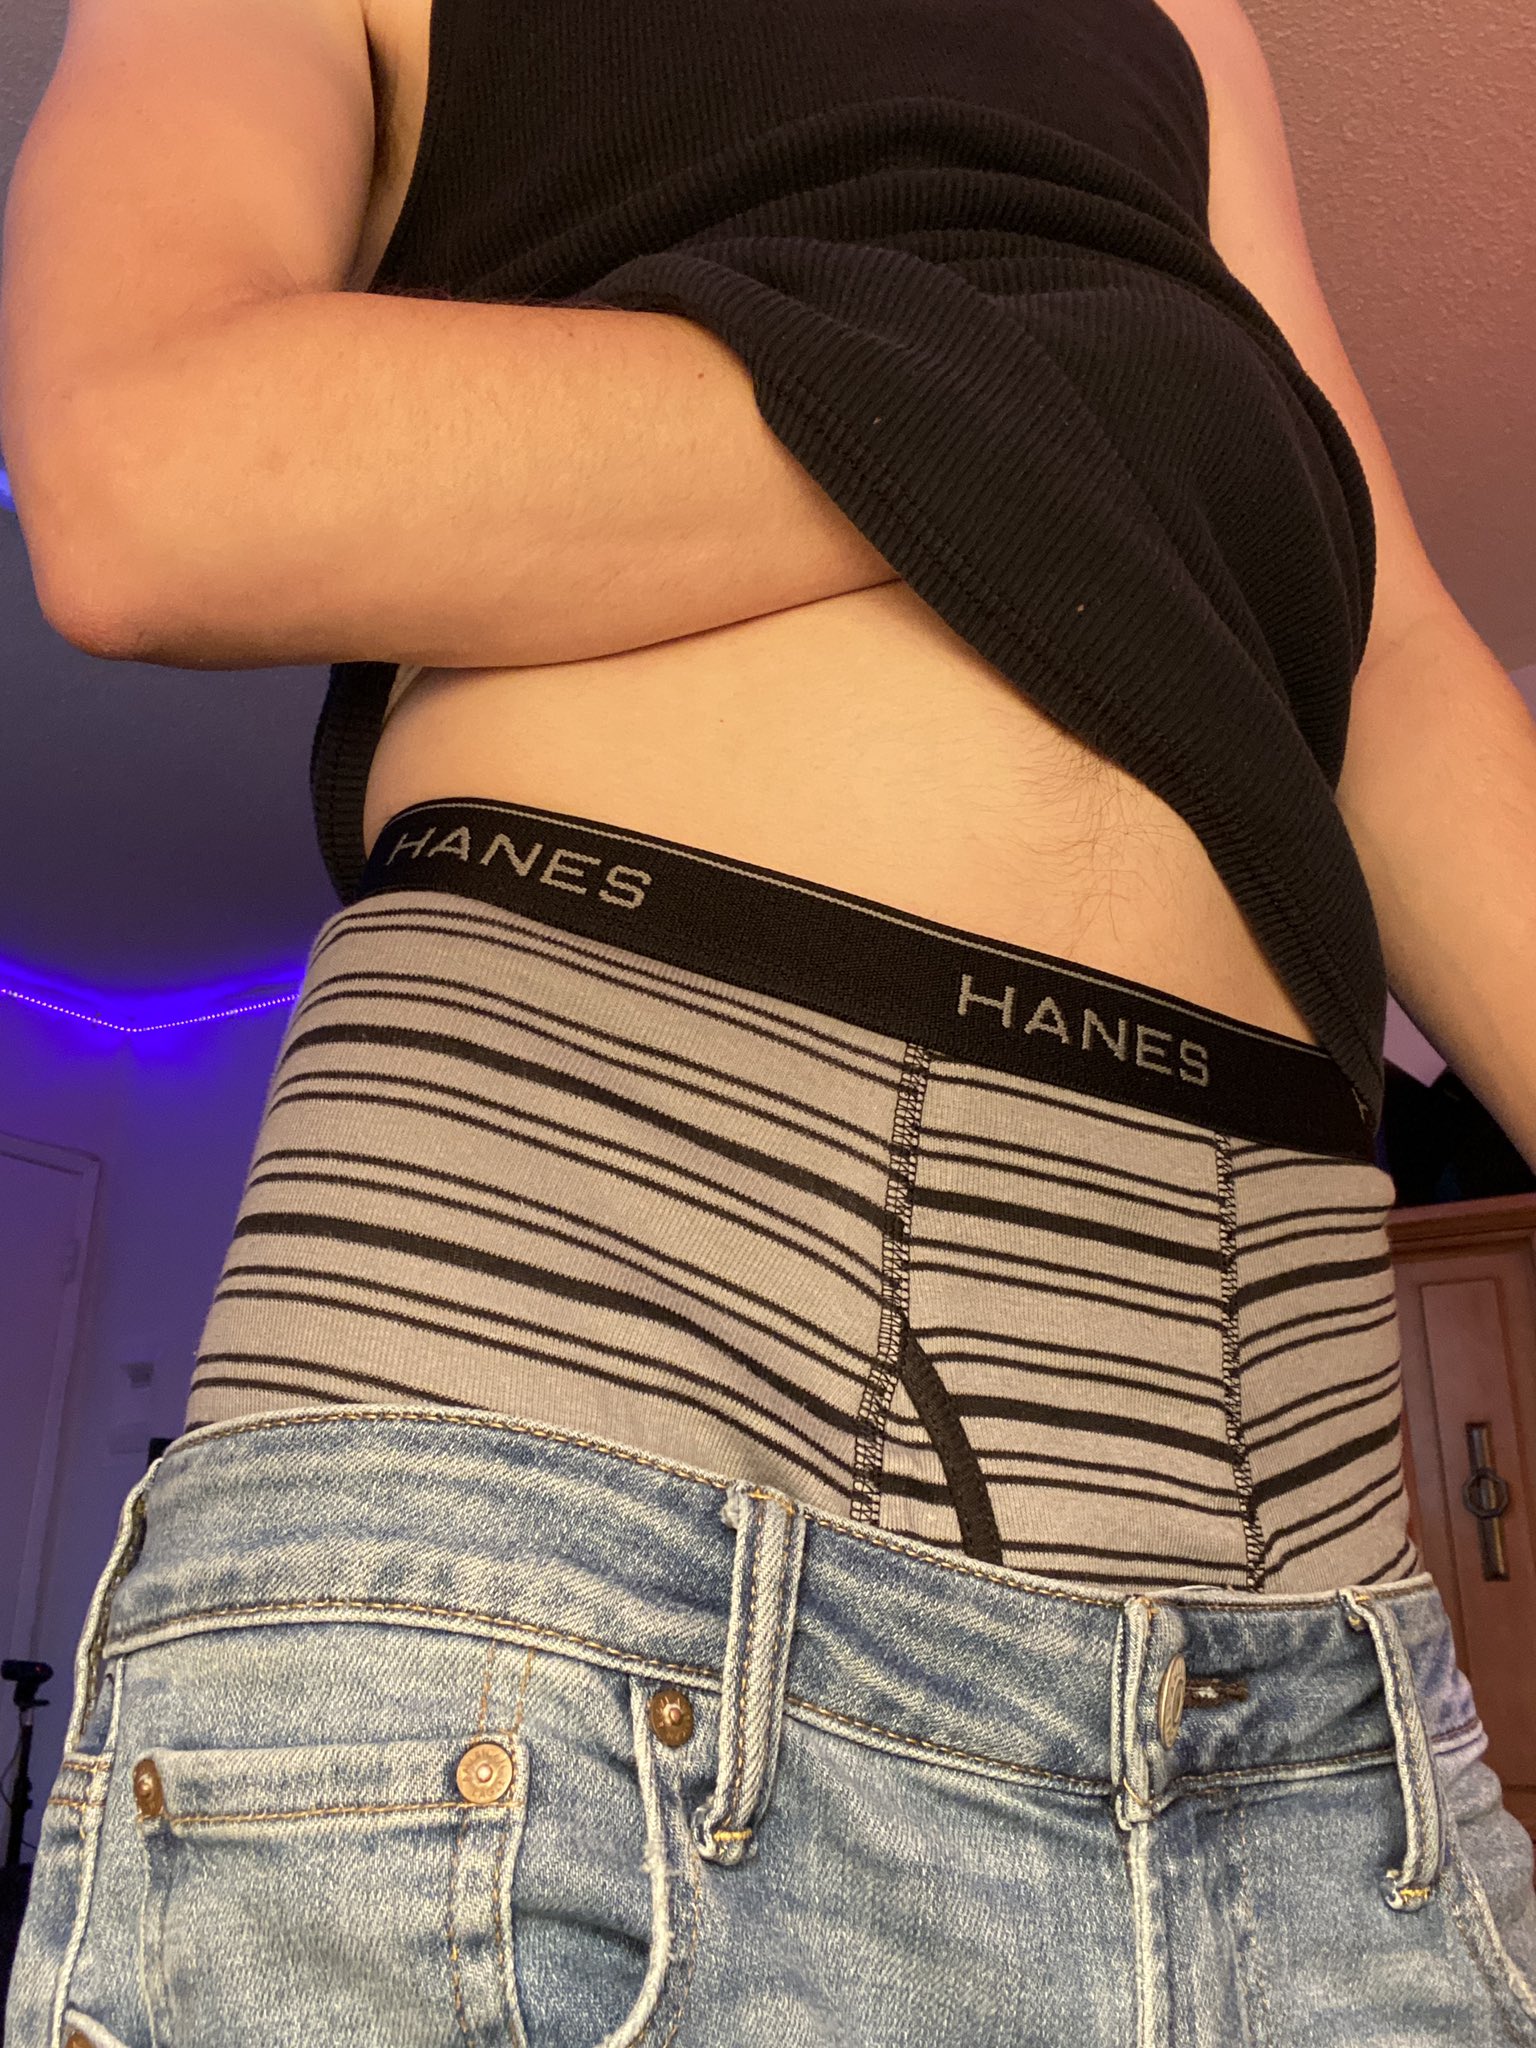 SpSagger on X: Not briefs but sporting some new Hanes boxer briefs. And  sagging just a little. Hehe 😜  / X